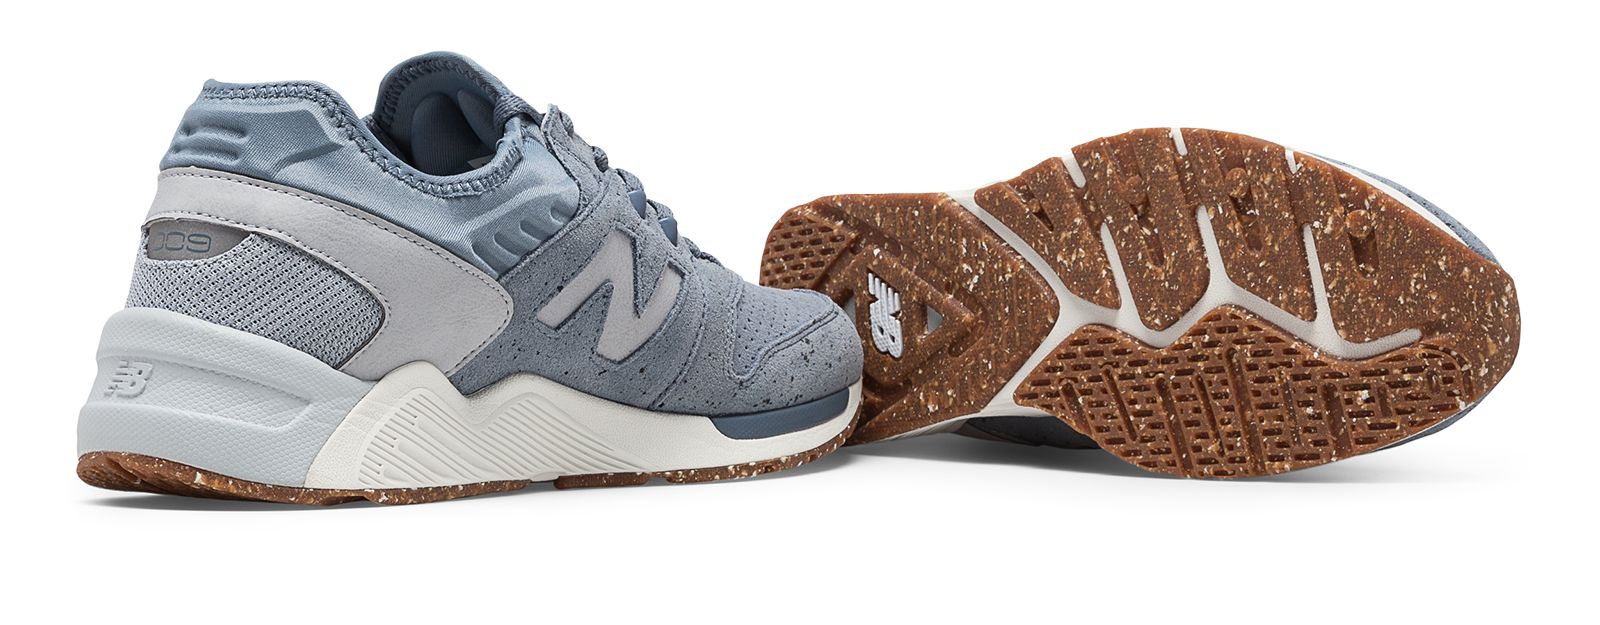 new balance speckle suede